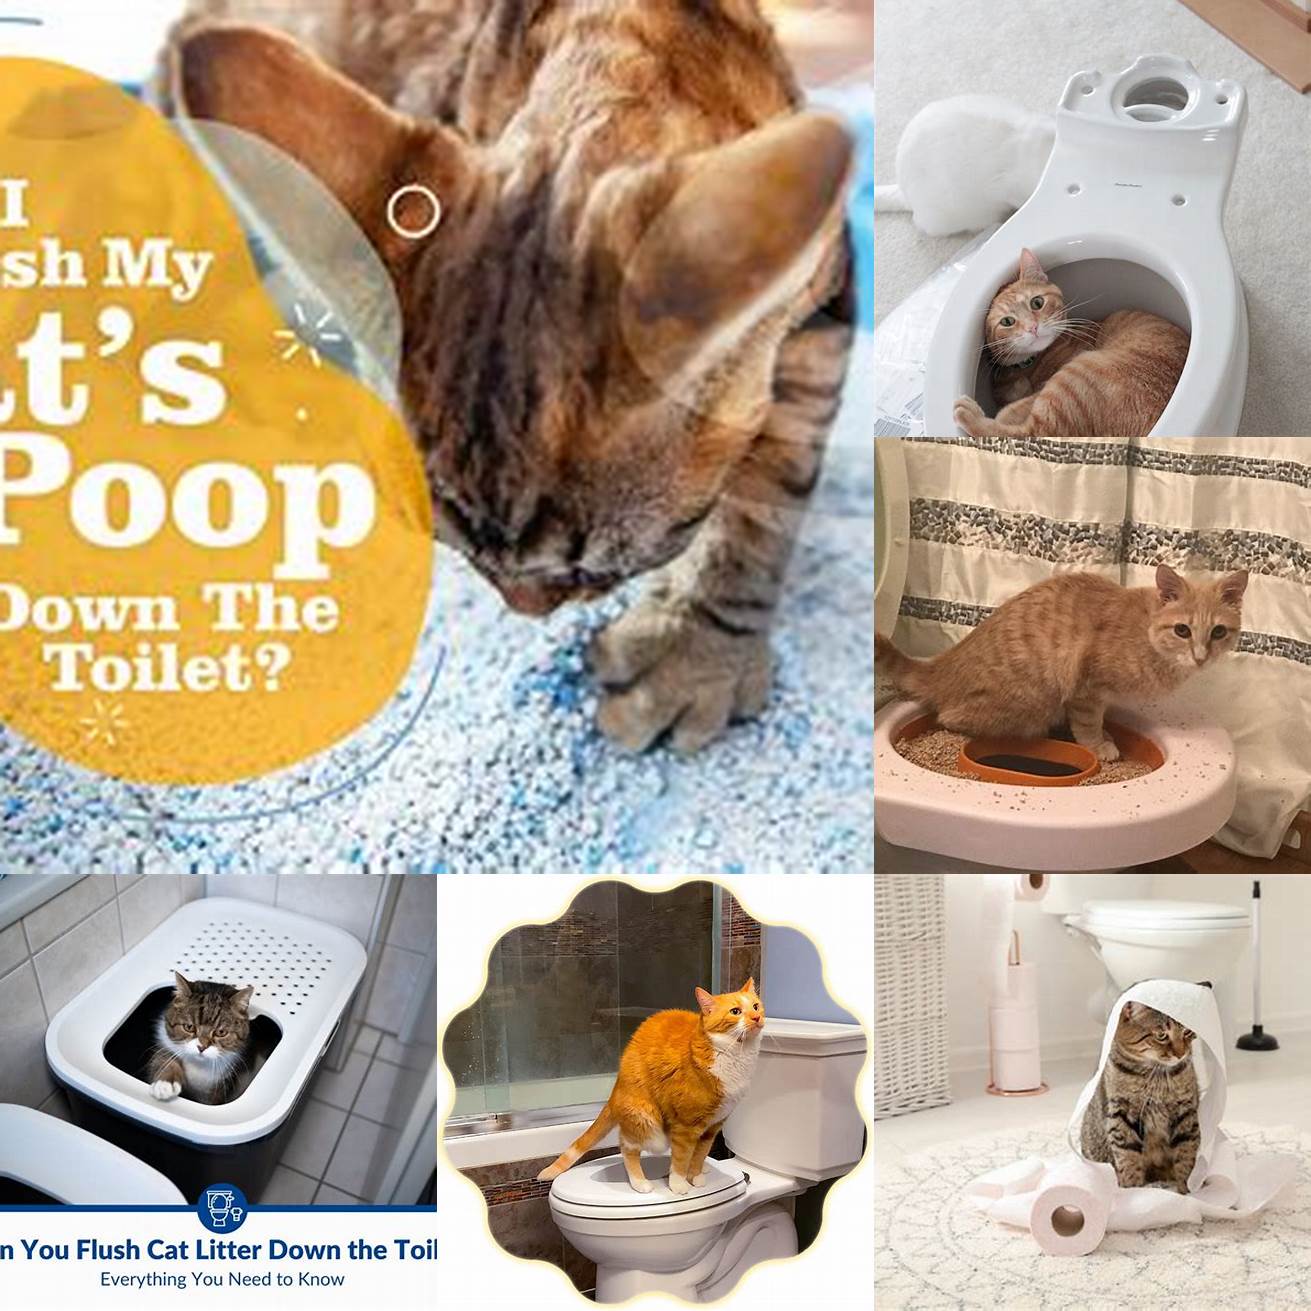 Q Can I flush cat poop down the toilet